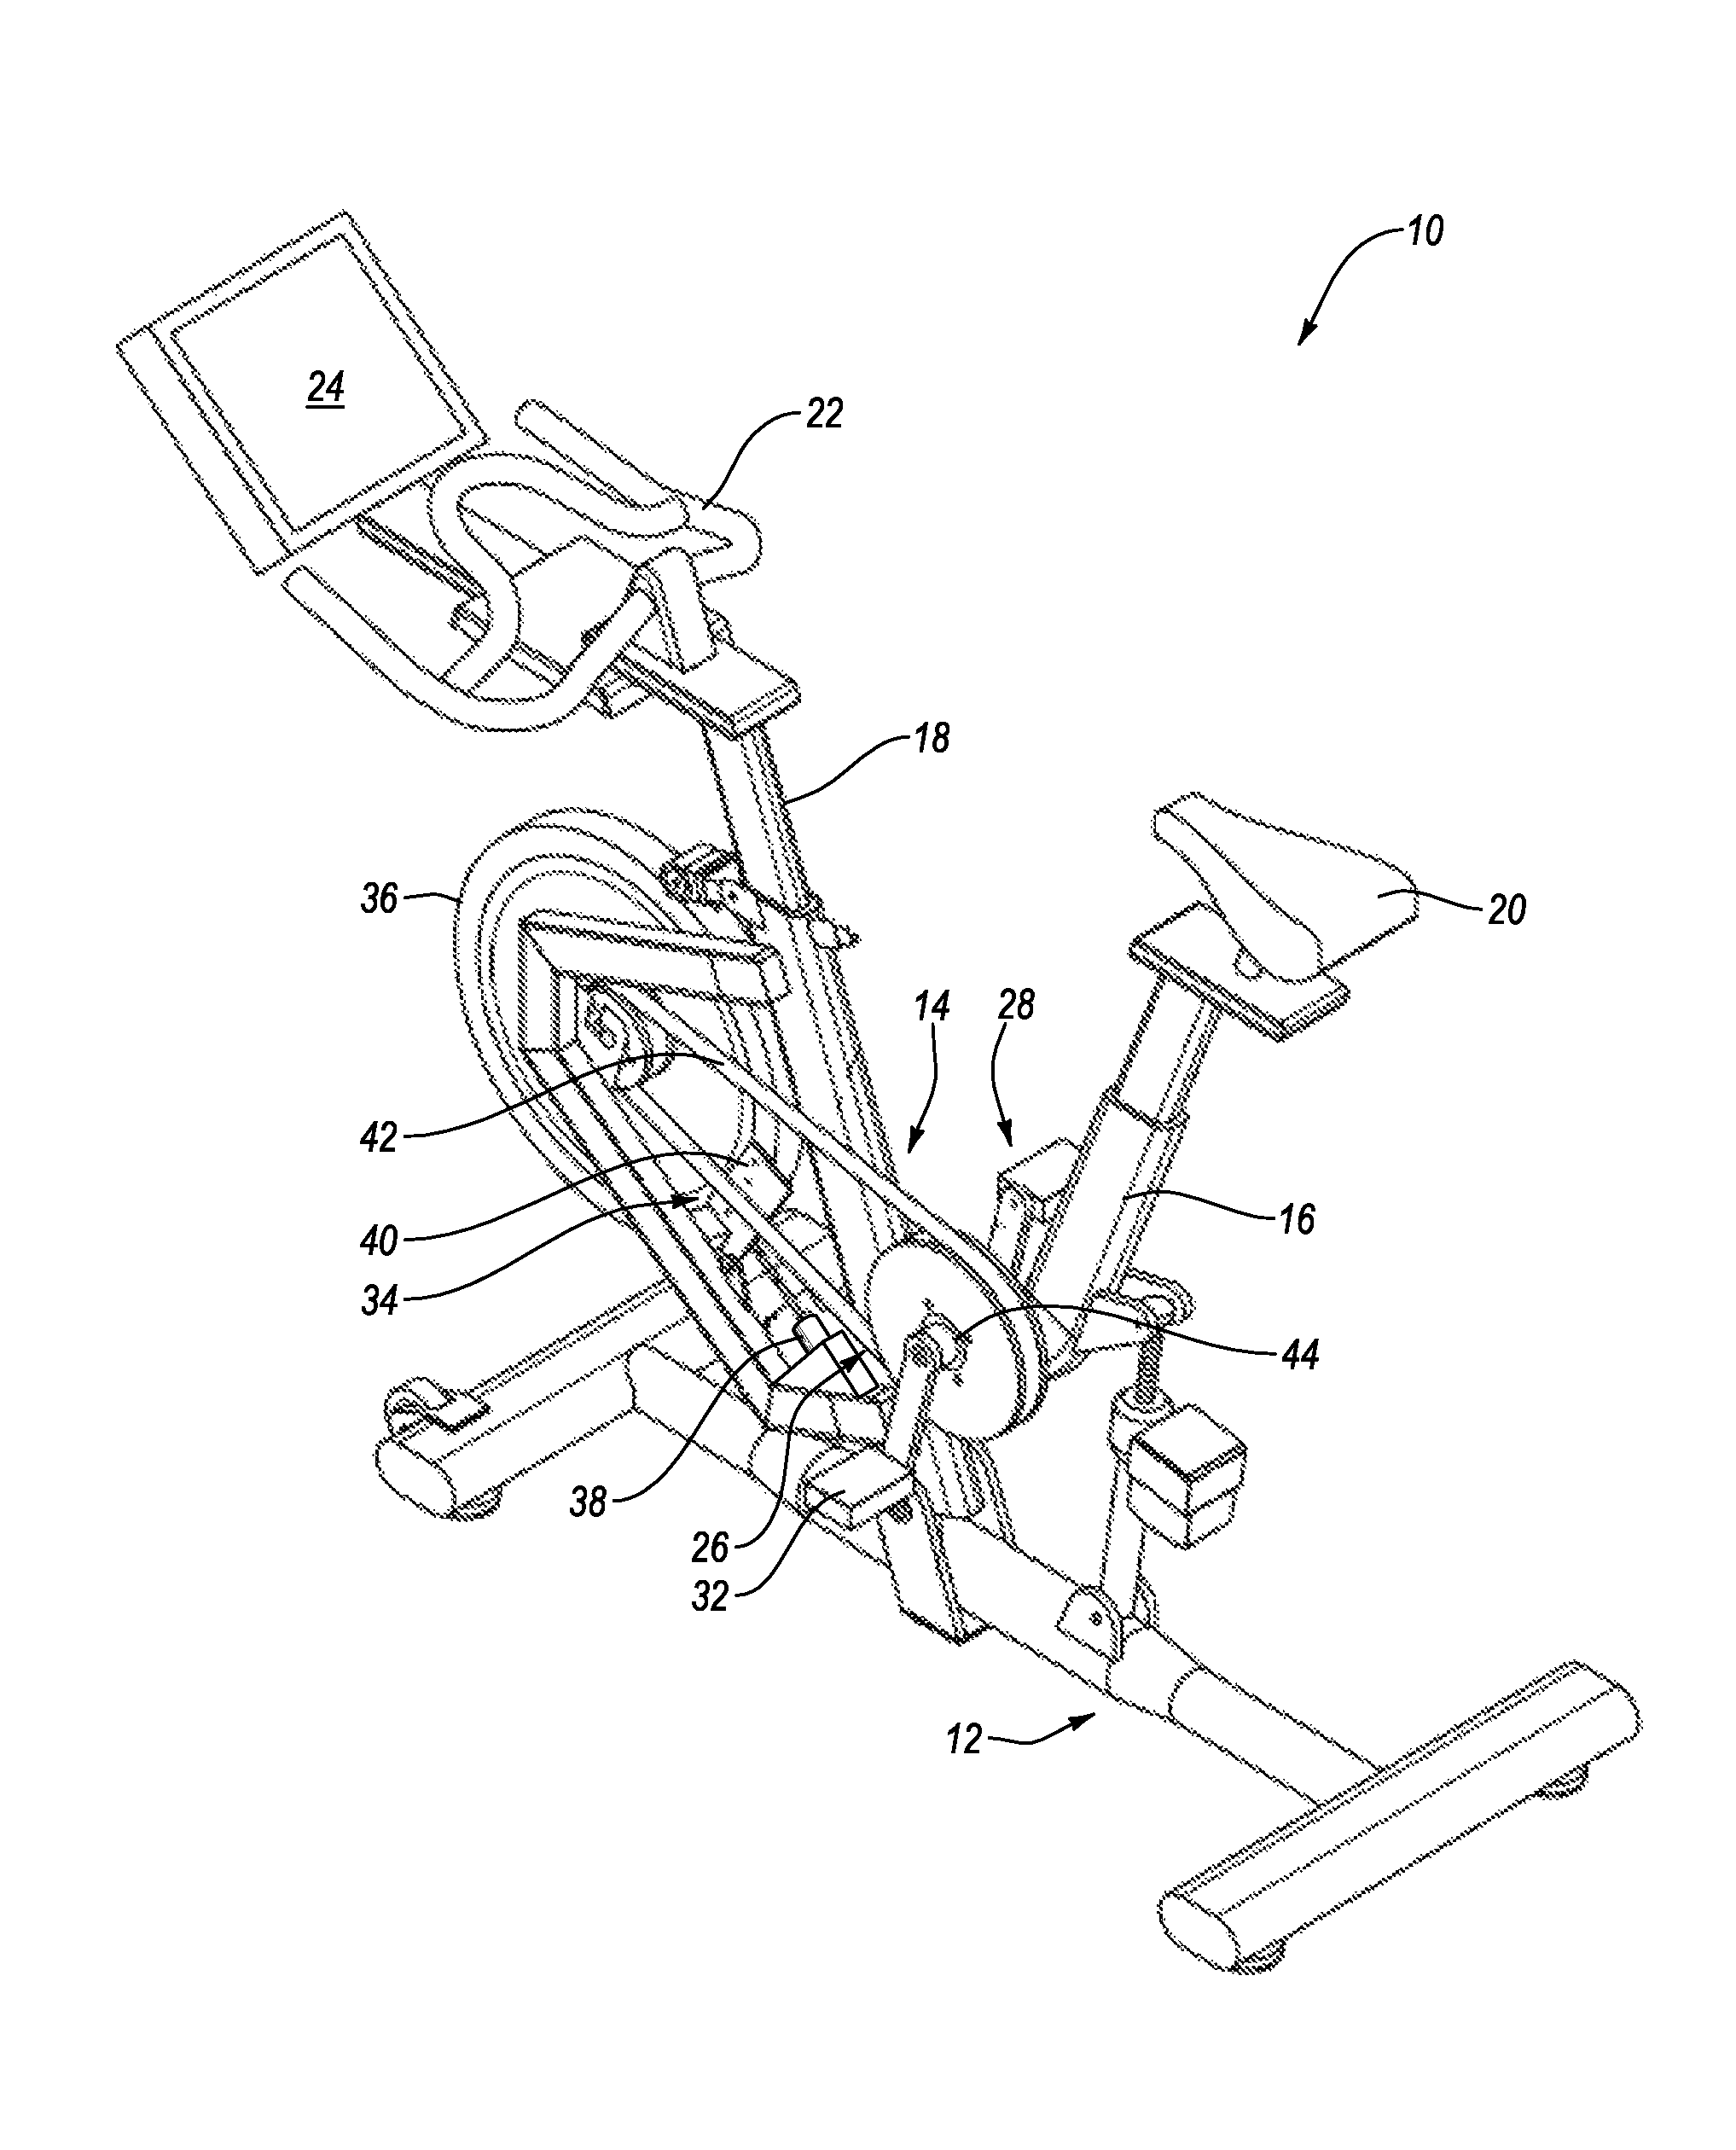 System and method for simulating environmental conditions on an exercise bicycle